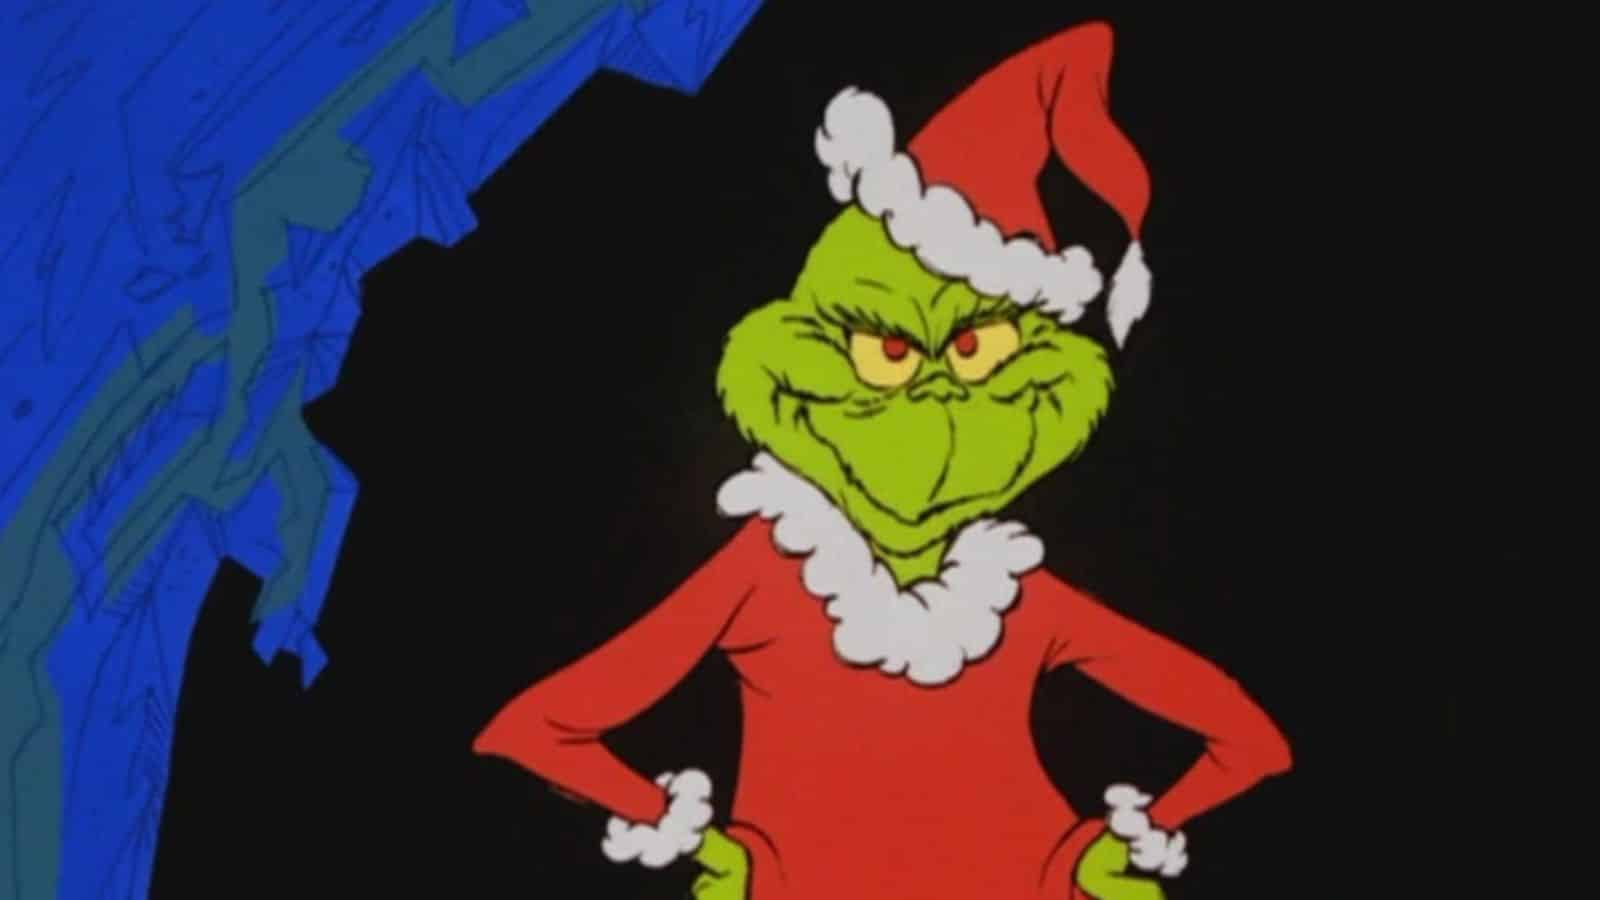 Boris Karloff voices the Grinch in How the Grinch Stole Christmas (1966)